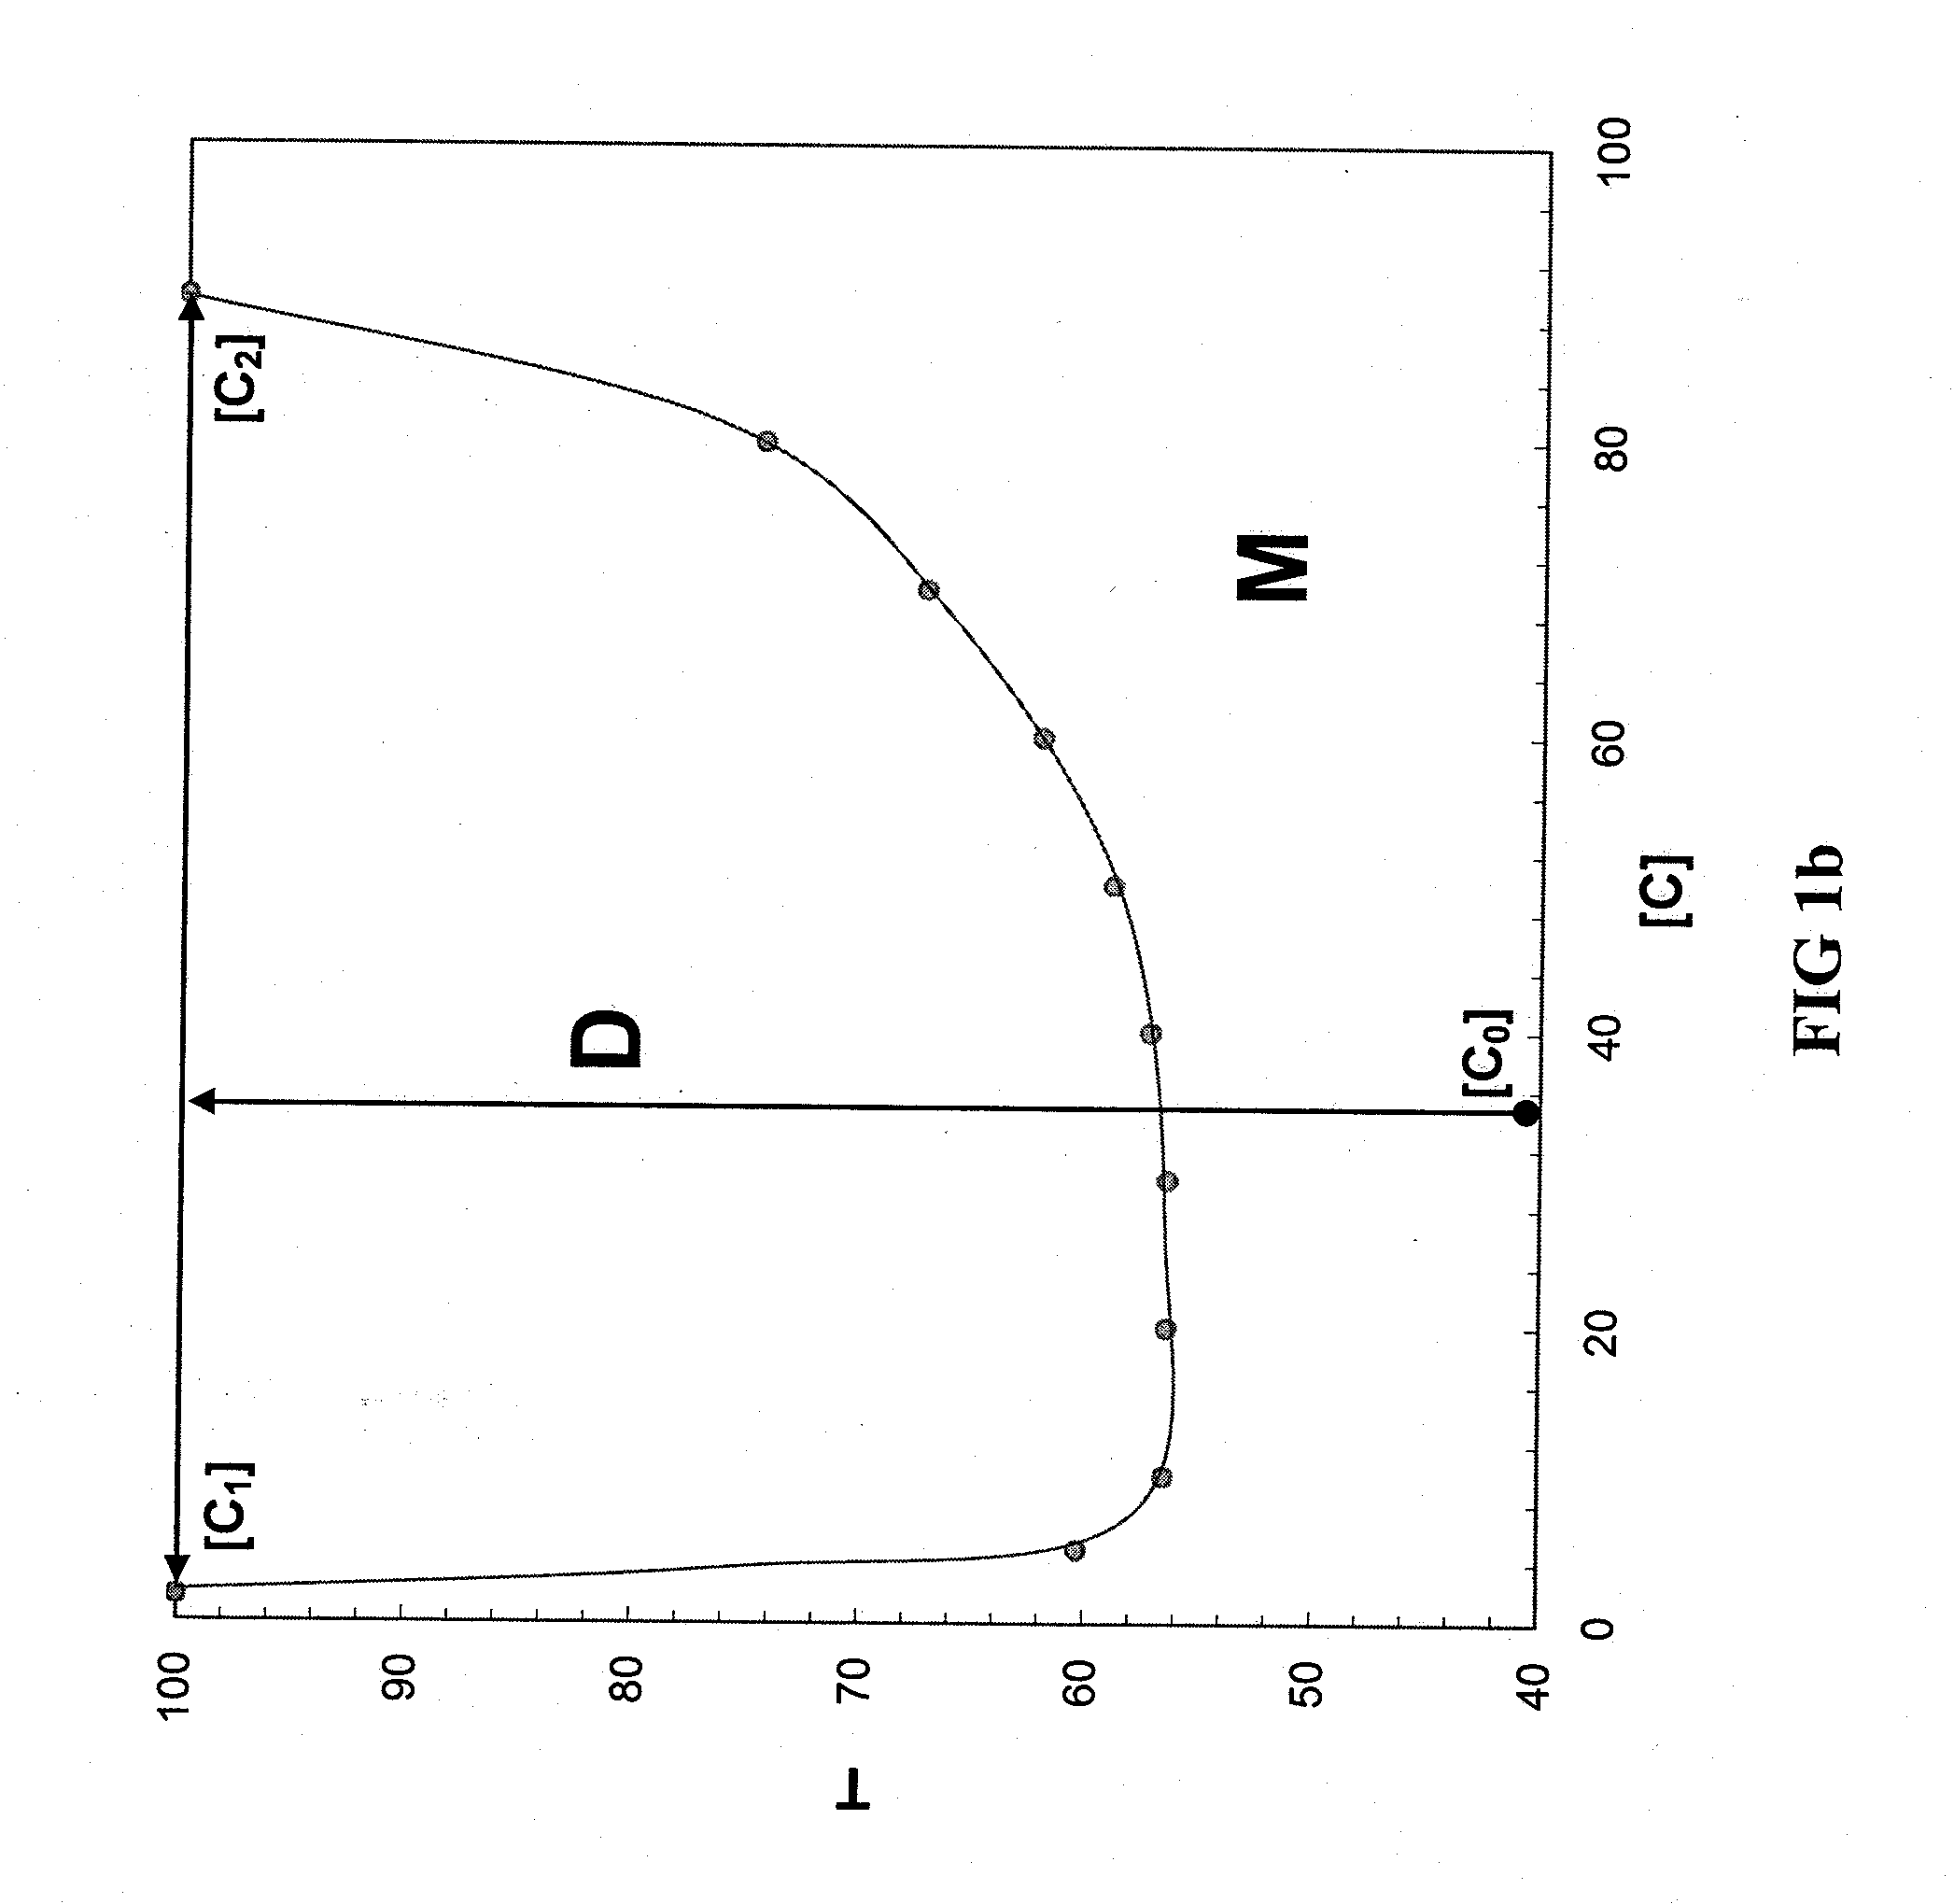 Gas deacidizing method using an absorbent solution with vaporization and/or purification of a fraction of the regenerated absorbent solution